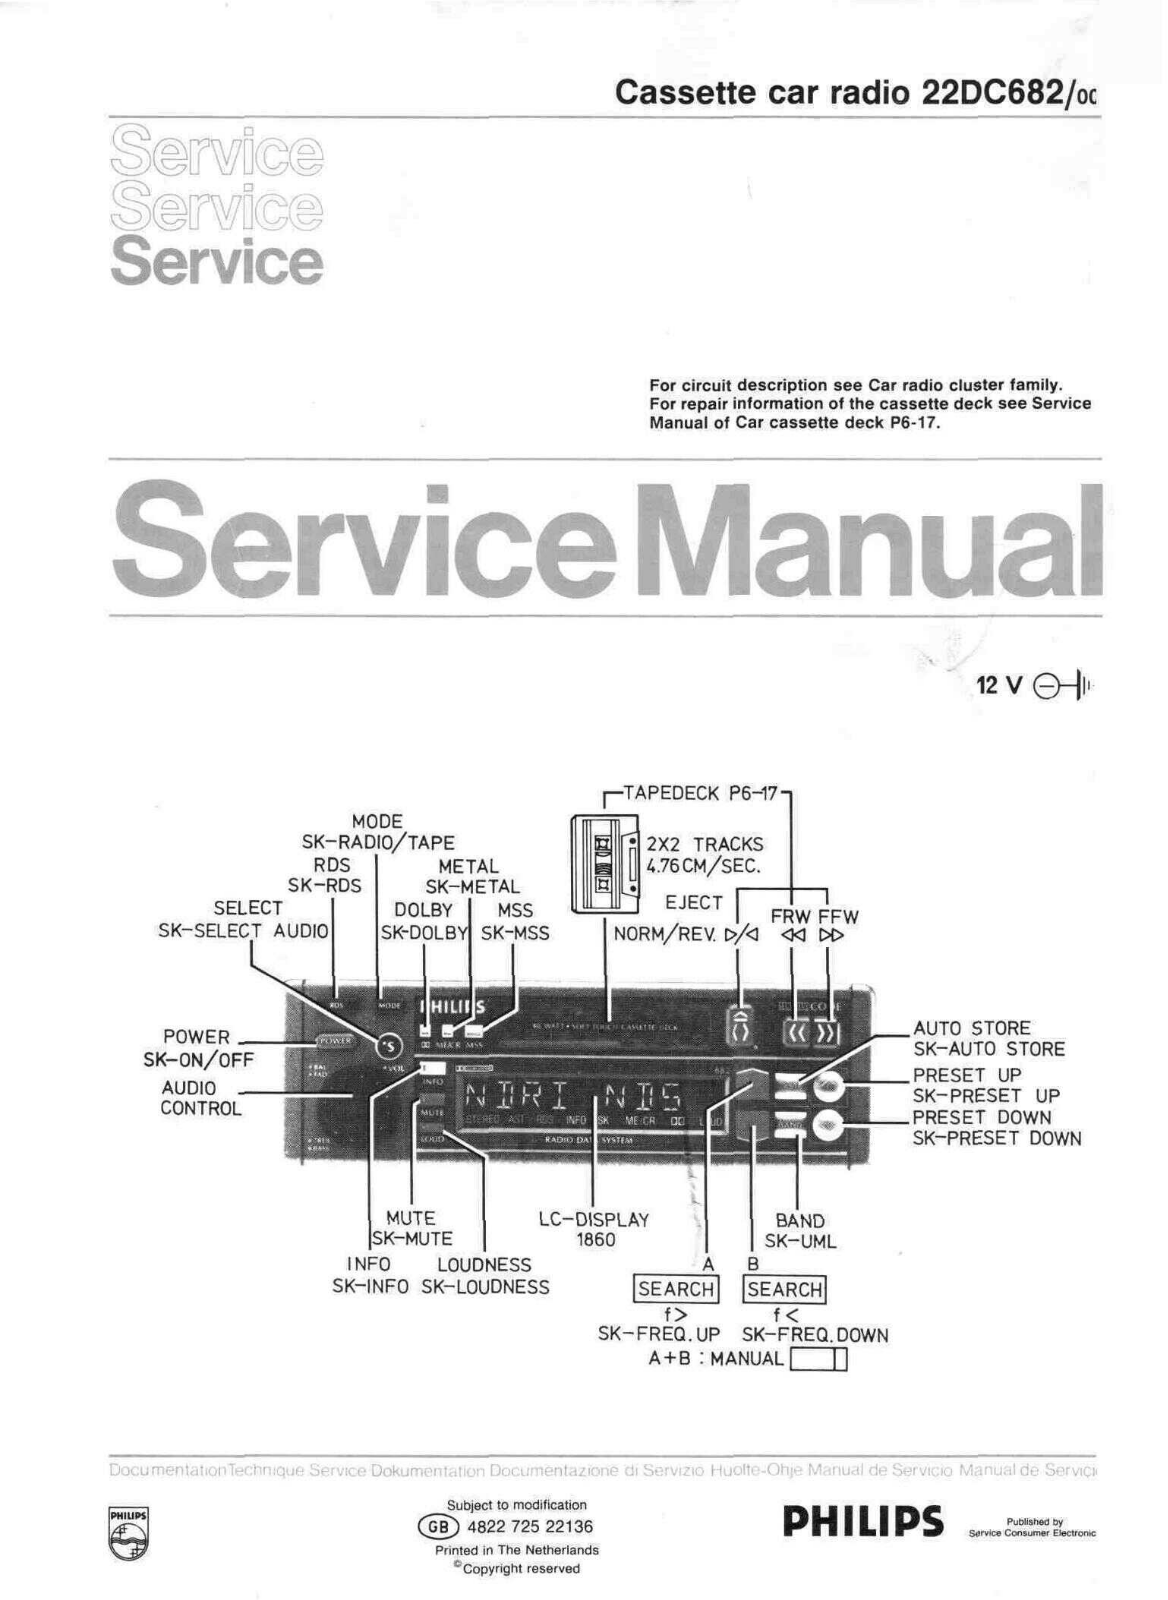 Philips 22-DC-682 Service Manual